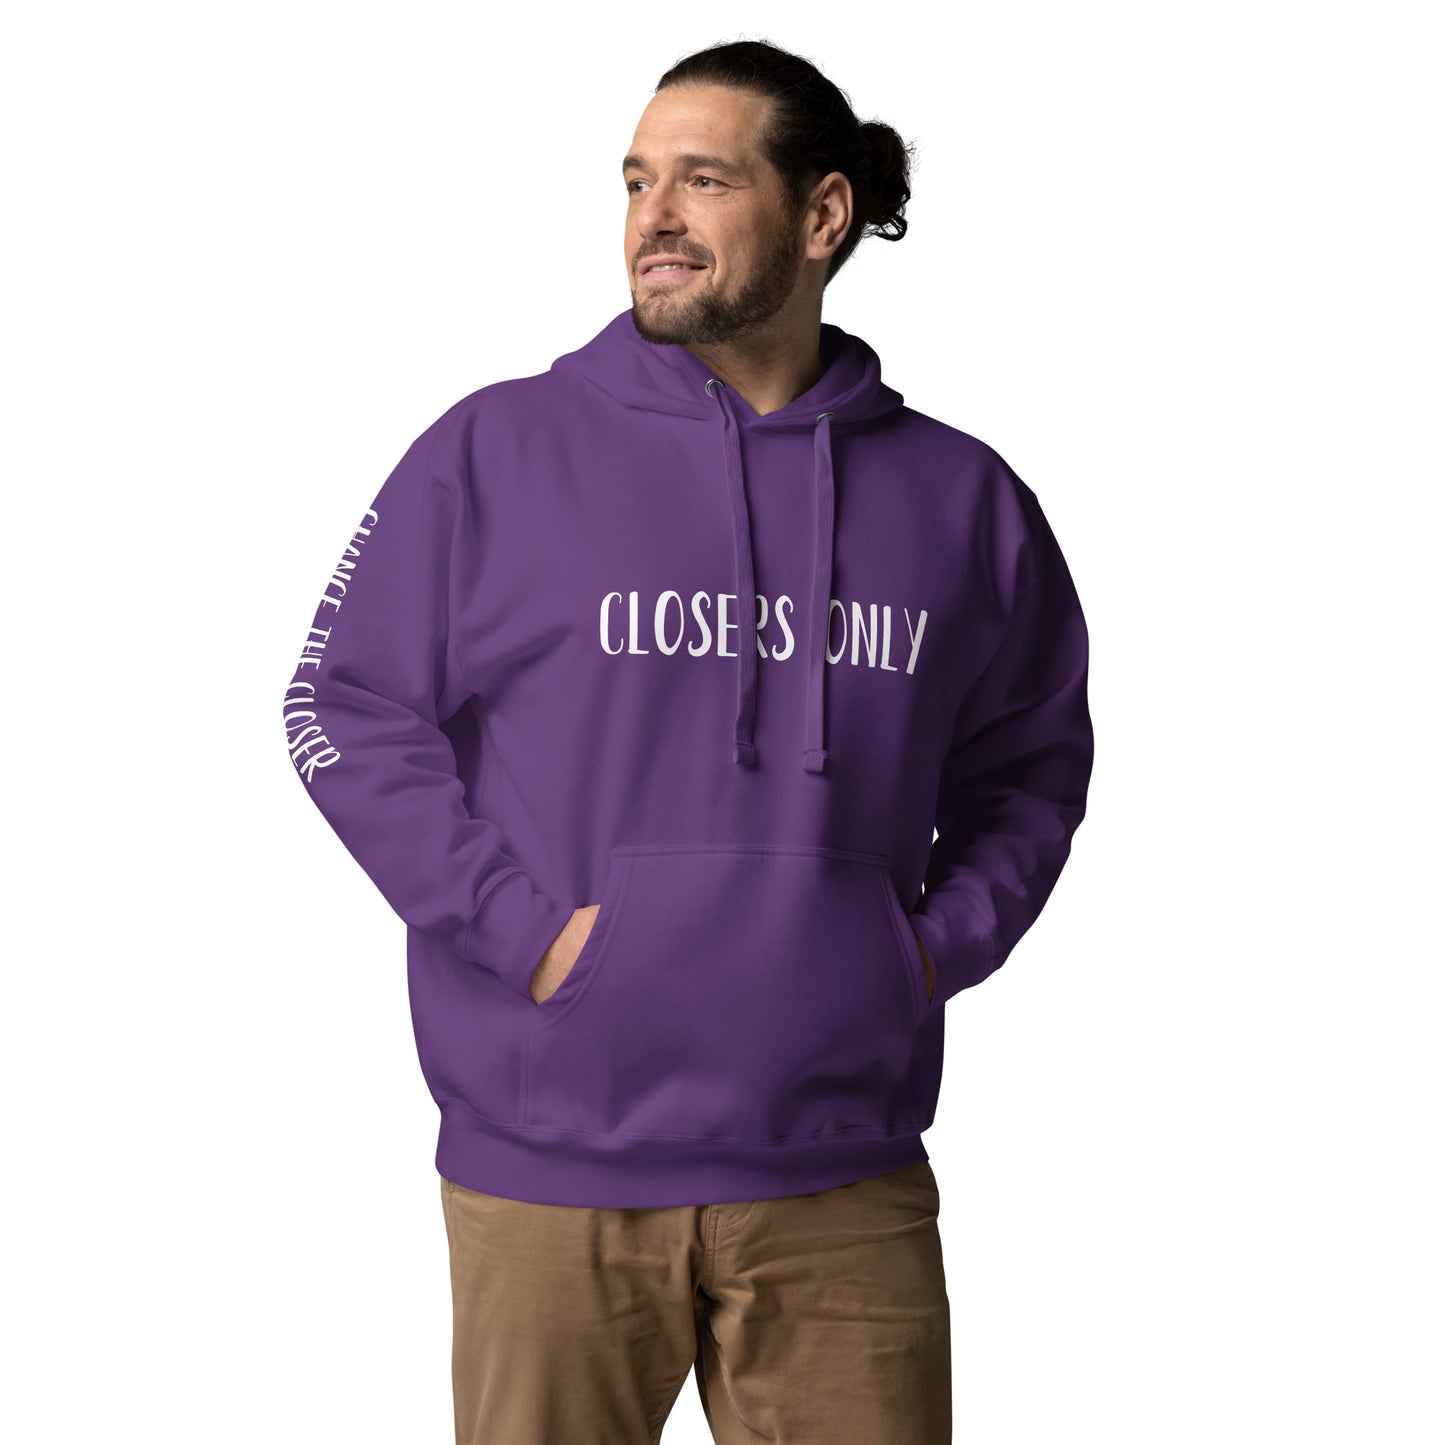 Closers Only Hoodie